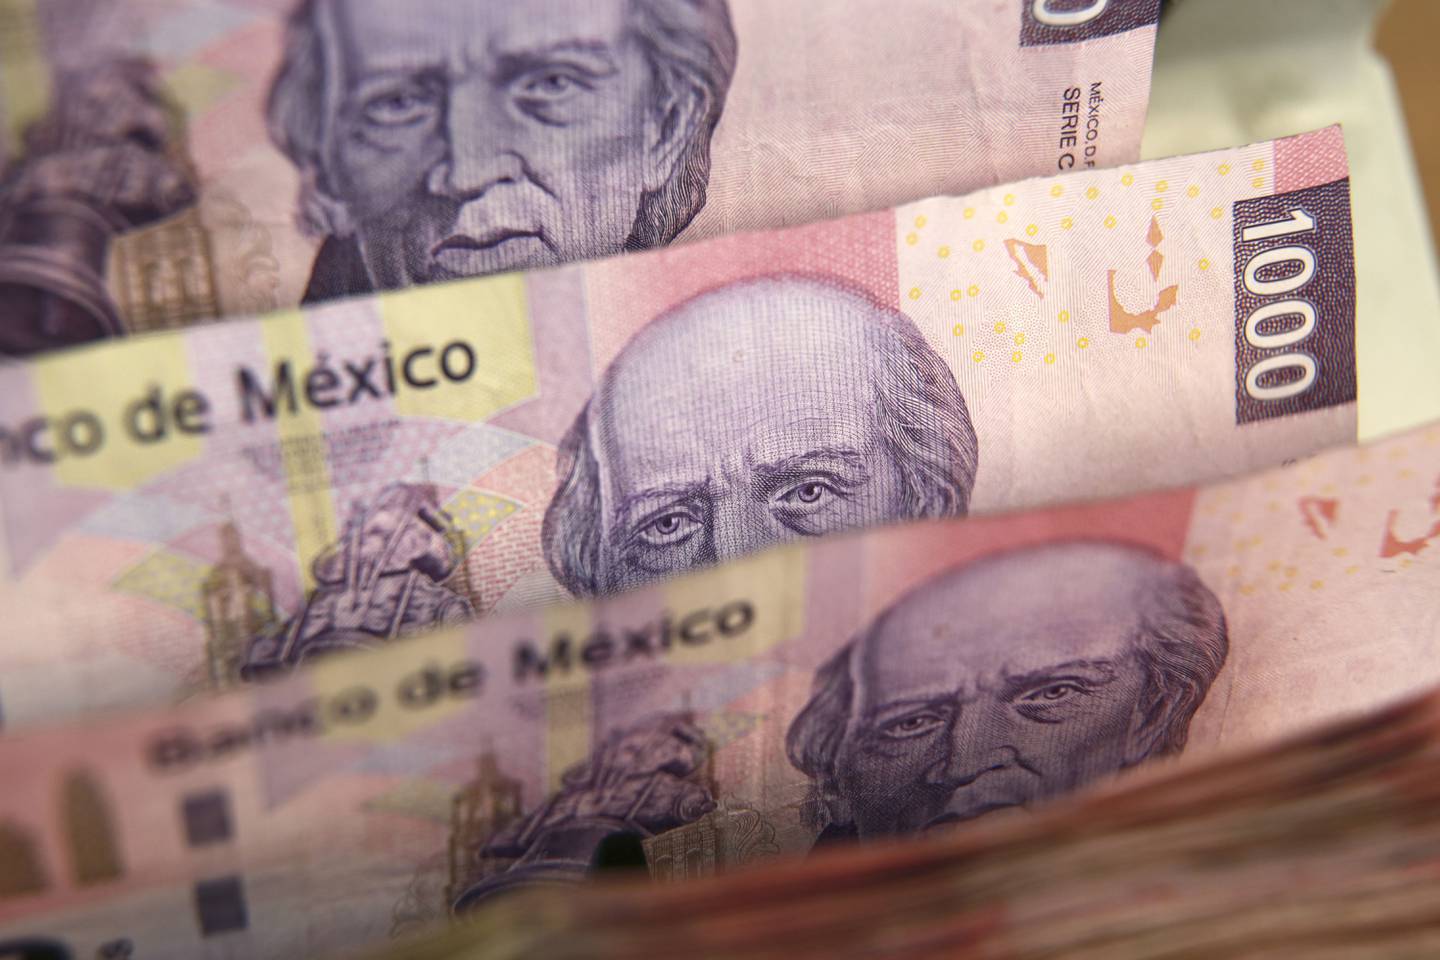 Mexican one thousand pesos bills are run through a counting machine